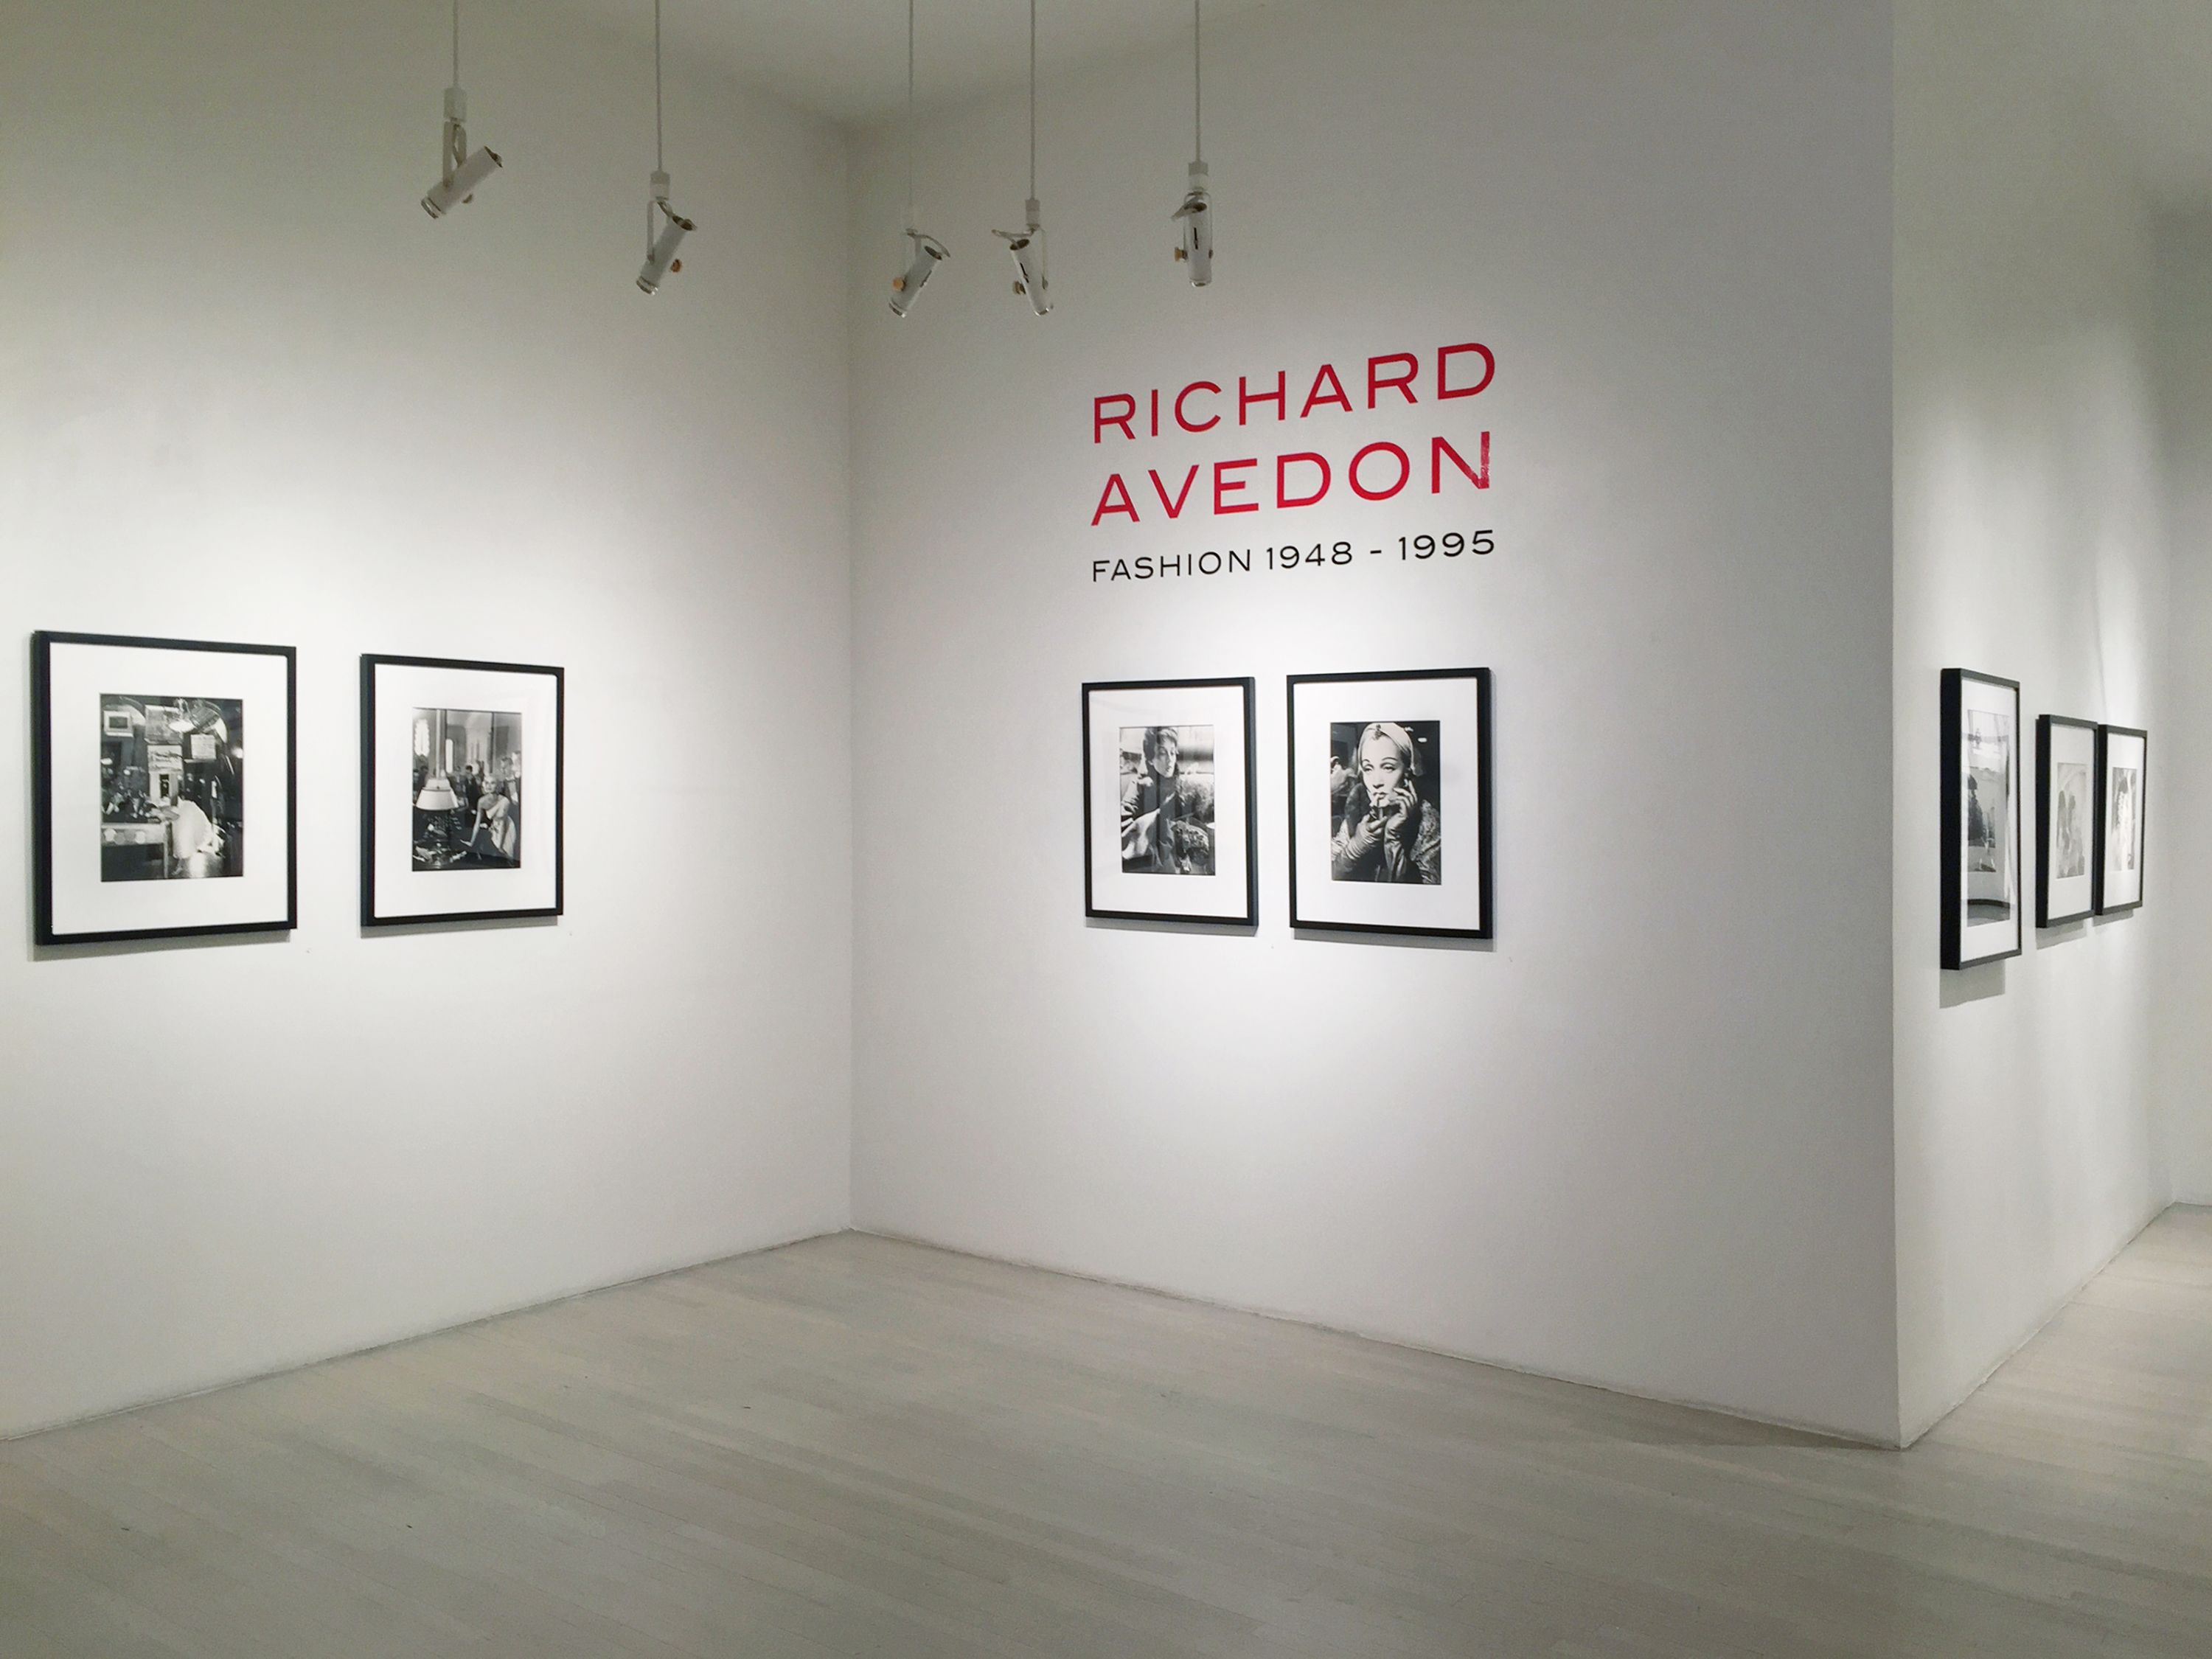 Richard Avedon - Fashion - Exhibitions - Staley-Wise Gallery